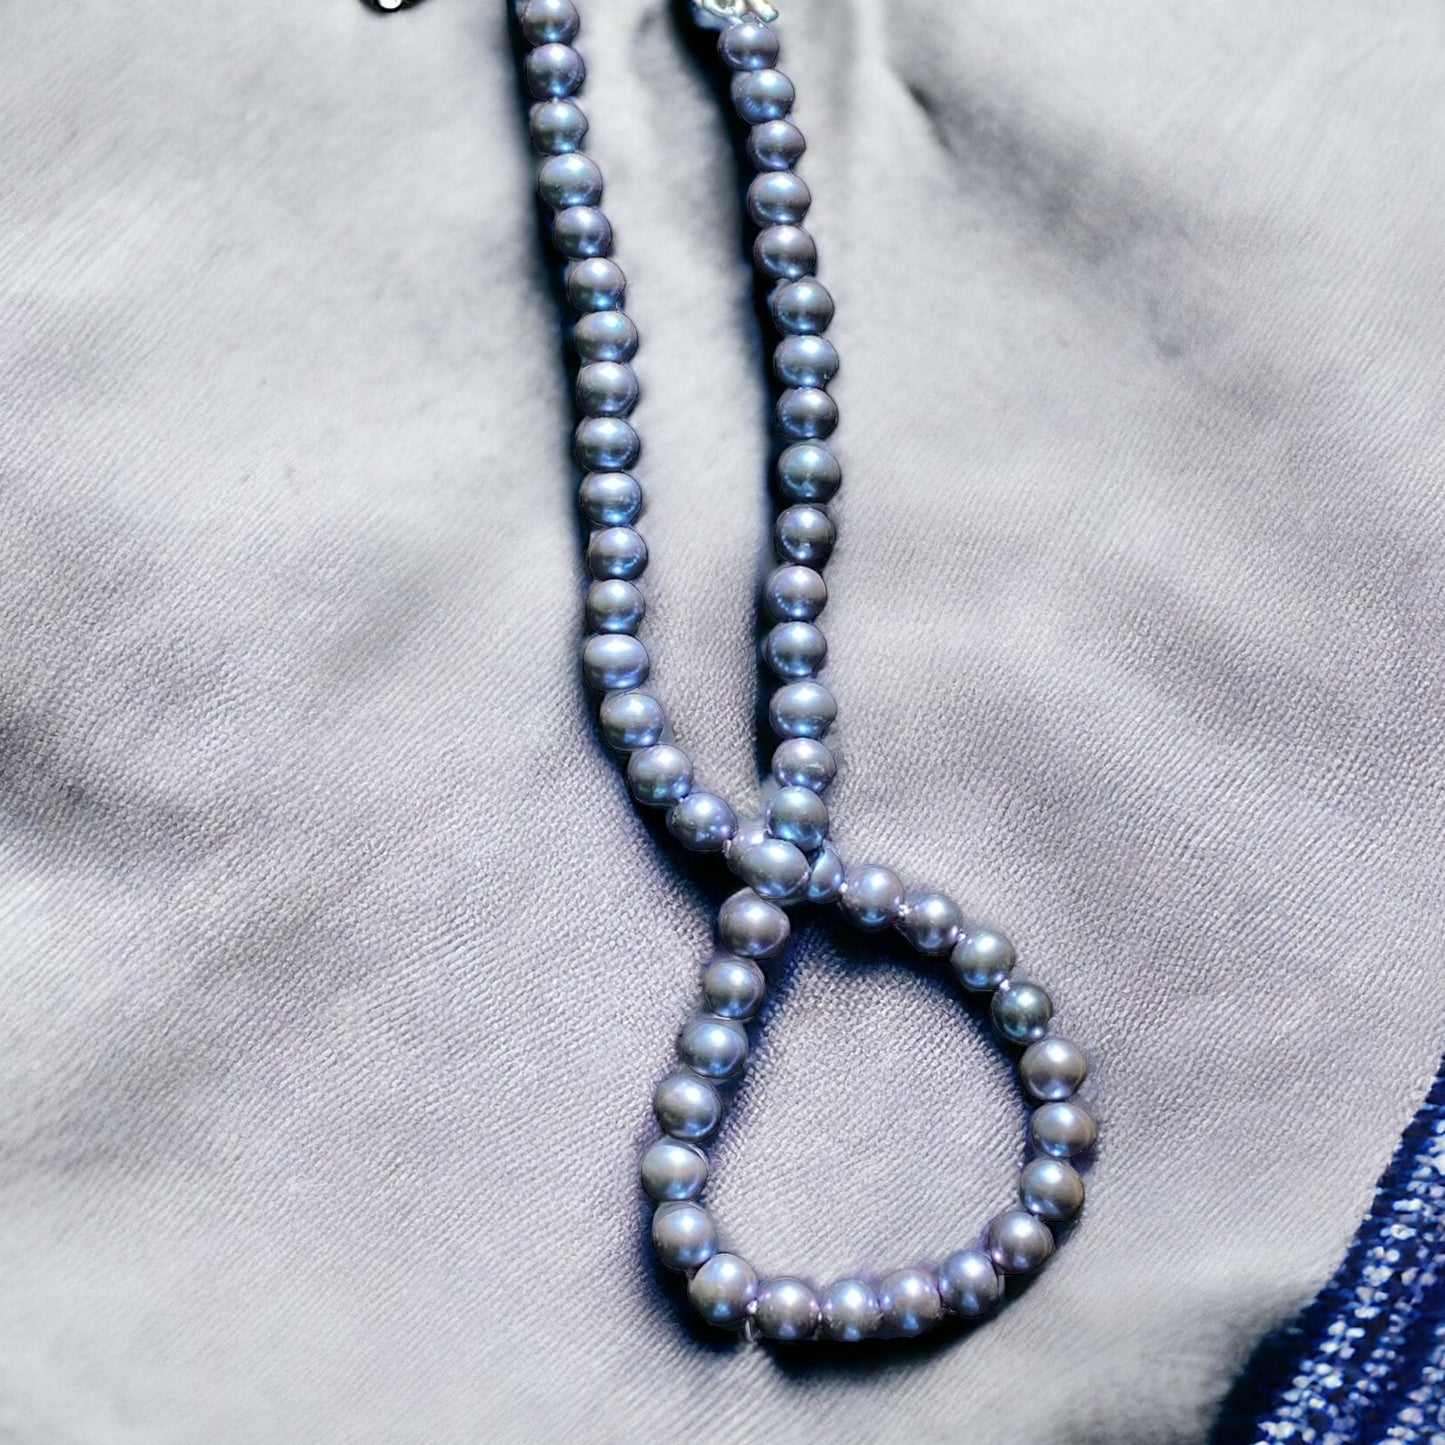 Lavender blue pearls on matching color silk,hand knotted with sterling silver handmade adjustable clasp 16-18” total length.